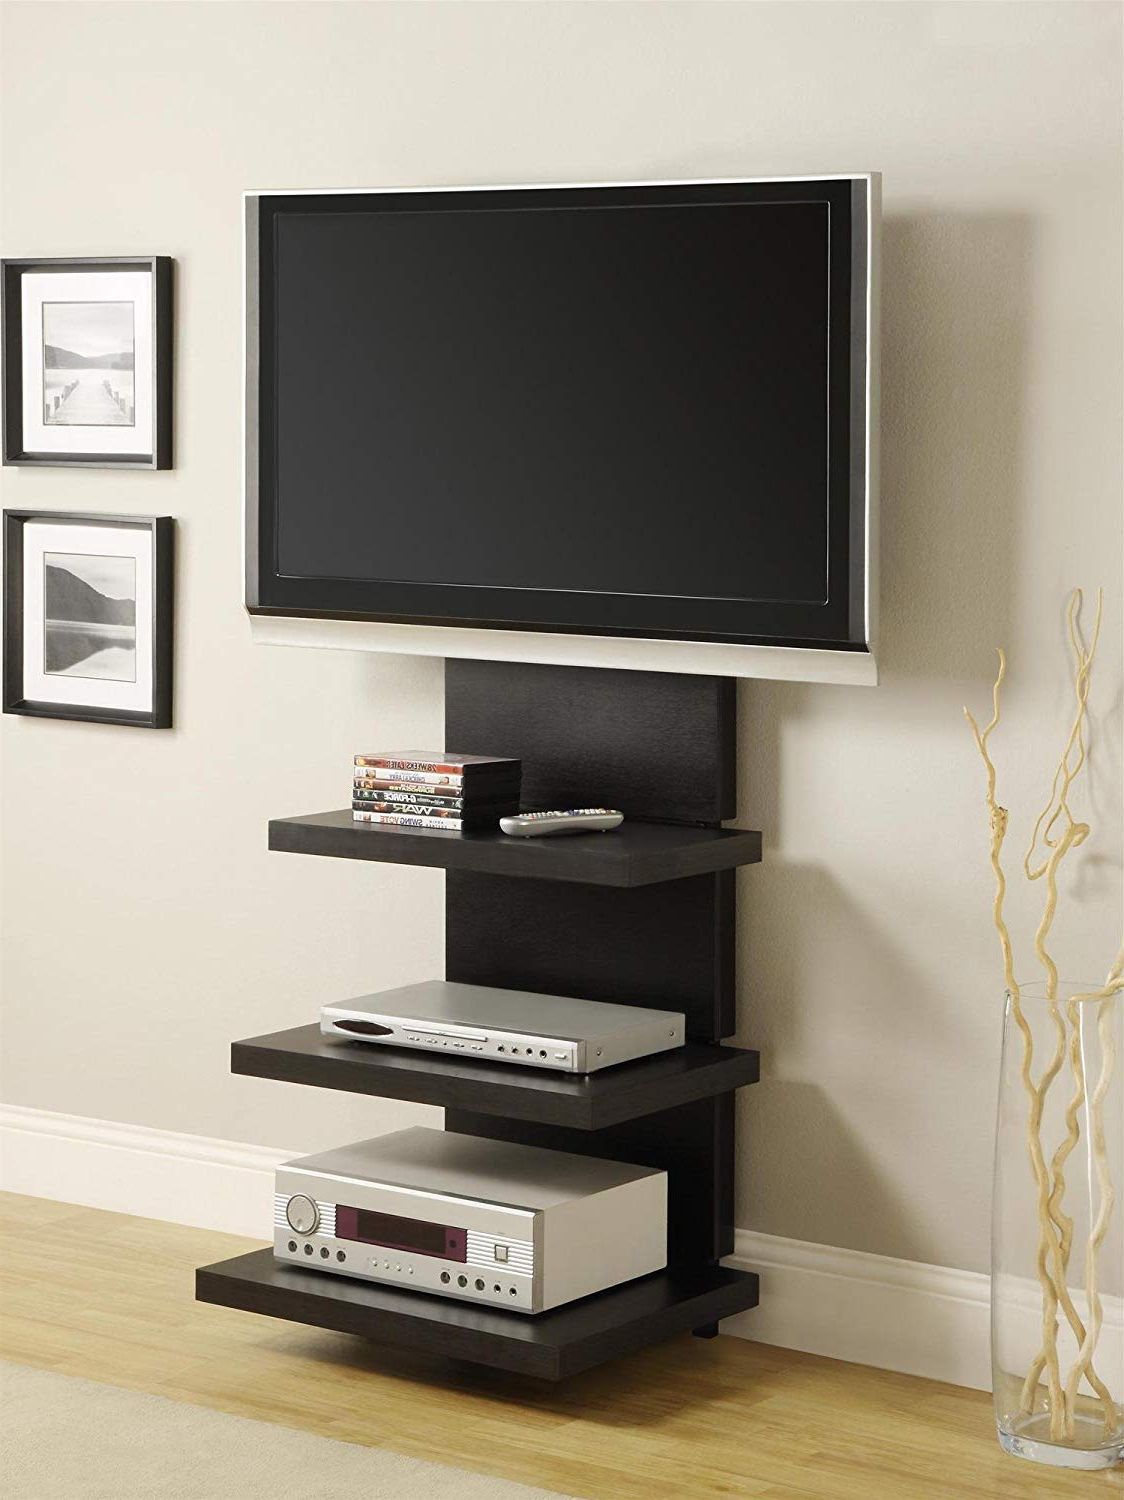 60 Best Diy Tv Stand Ideas For Your Room Interior With Regard To Diy Convertible Tv Stands And Bookcase (Gallery 10 of 20)